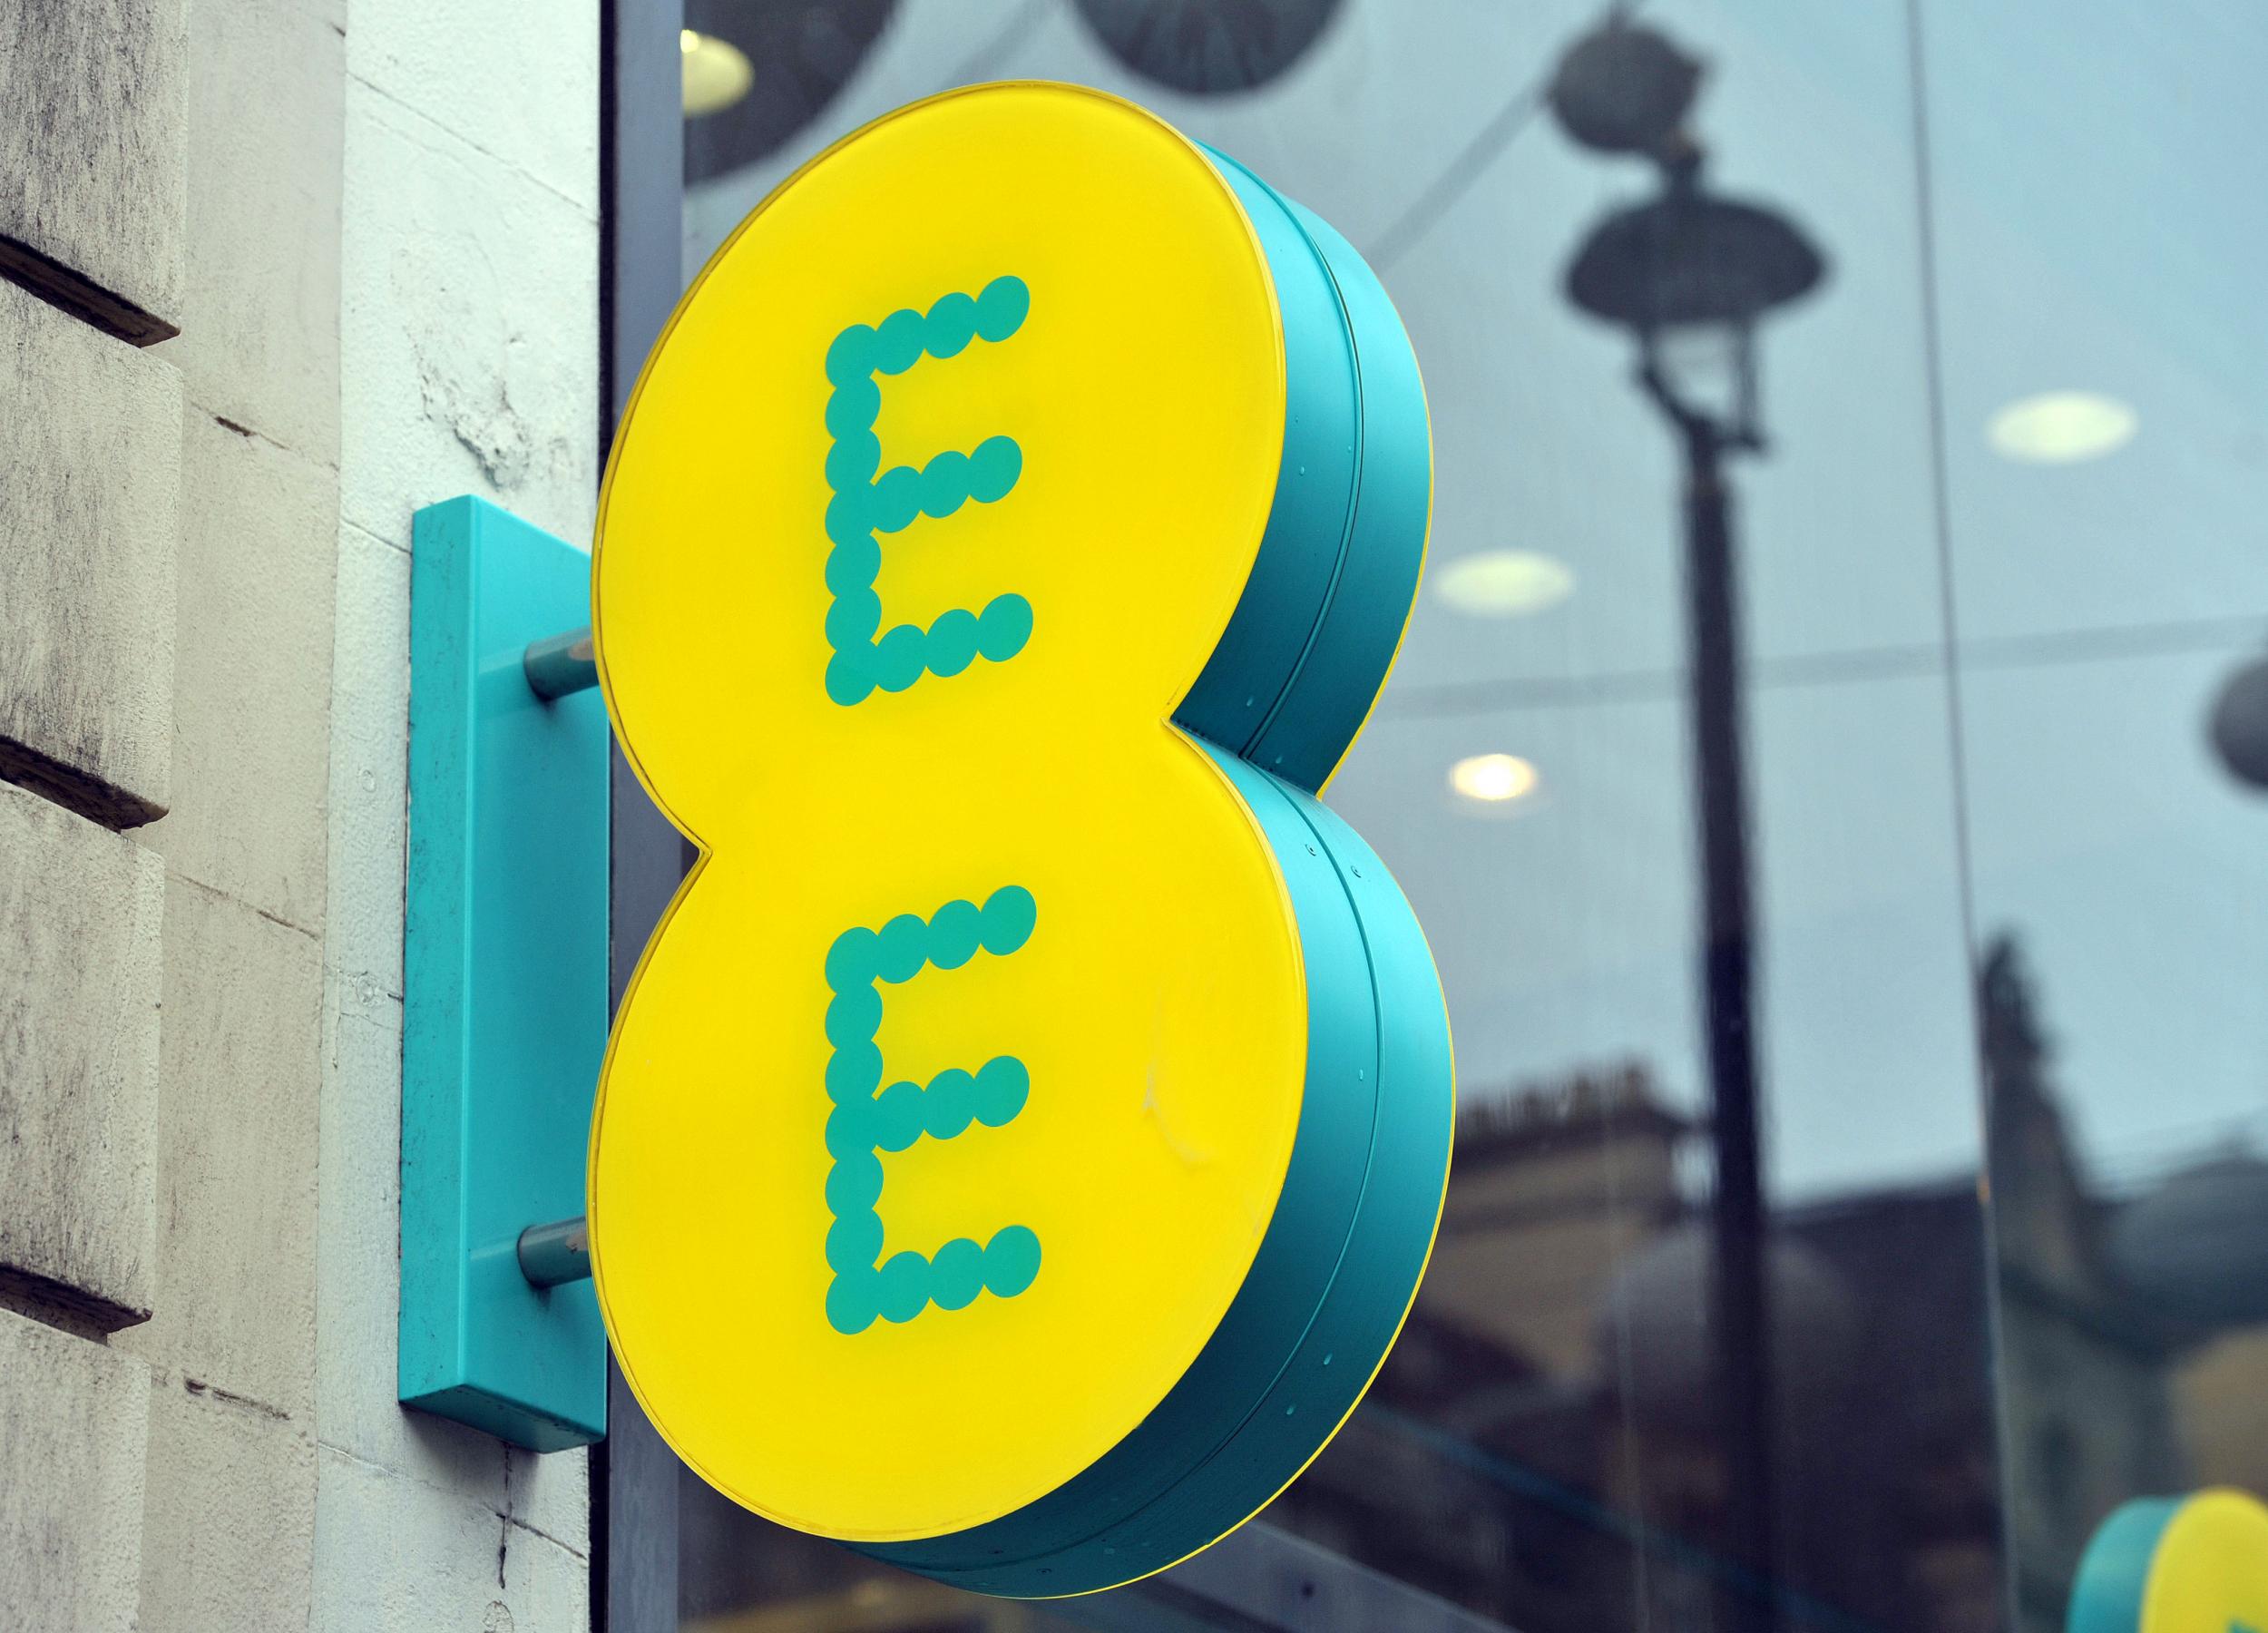 EE holds 45 per cent of all usable mobile spectrum